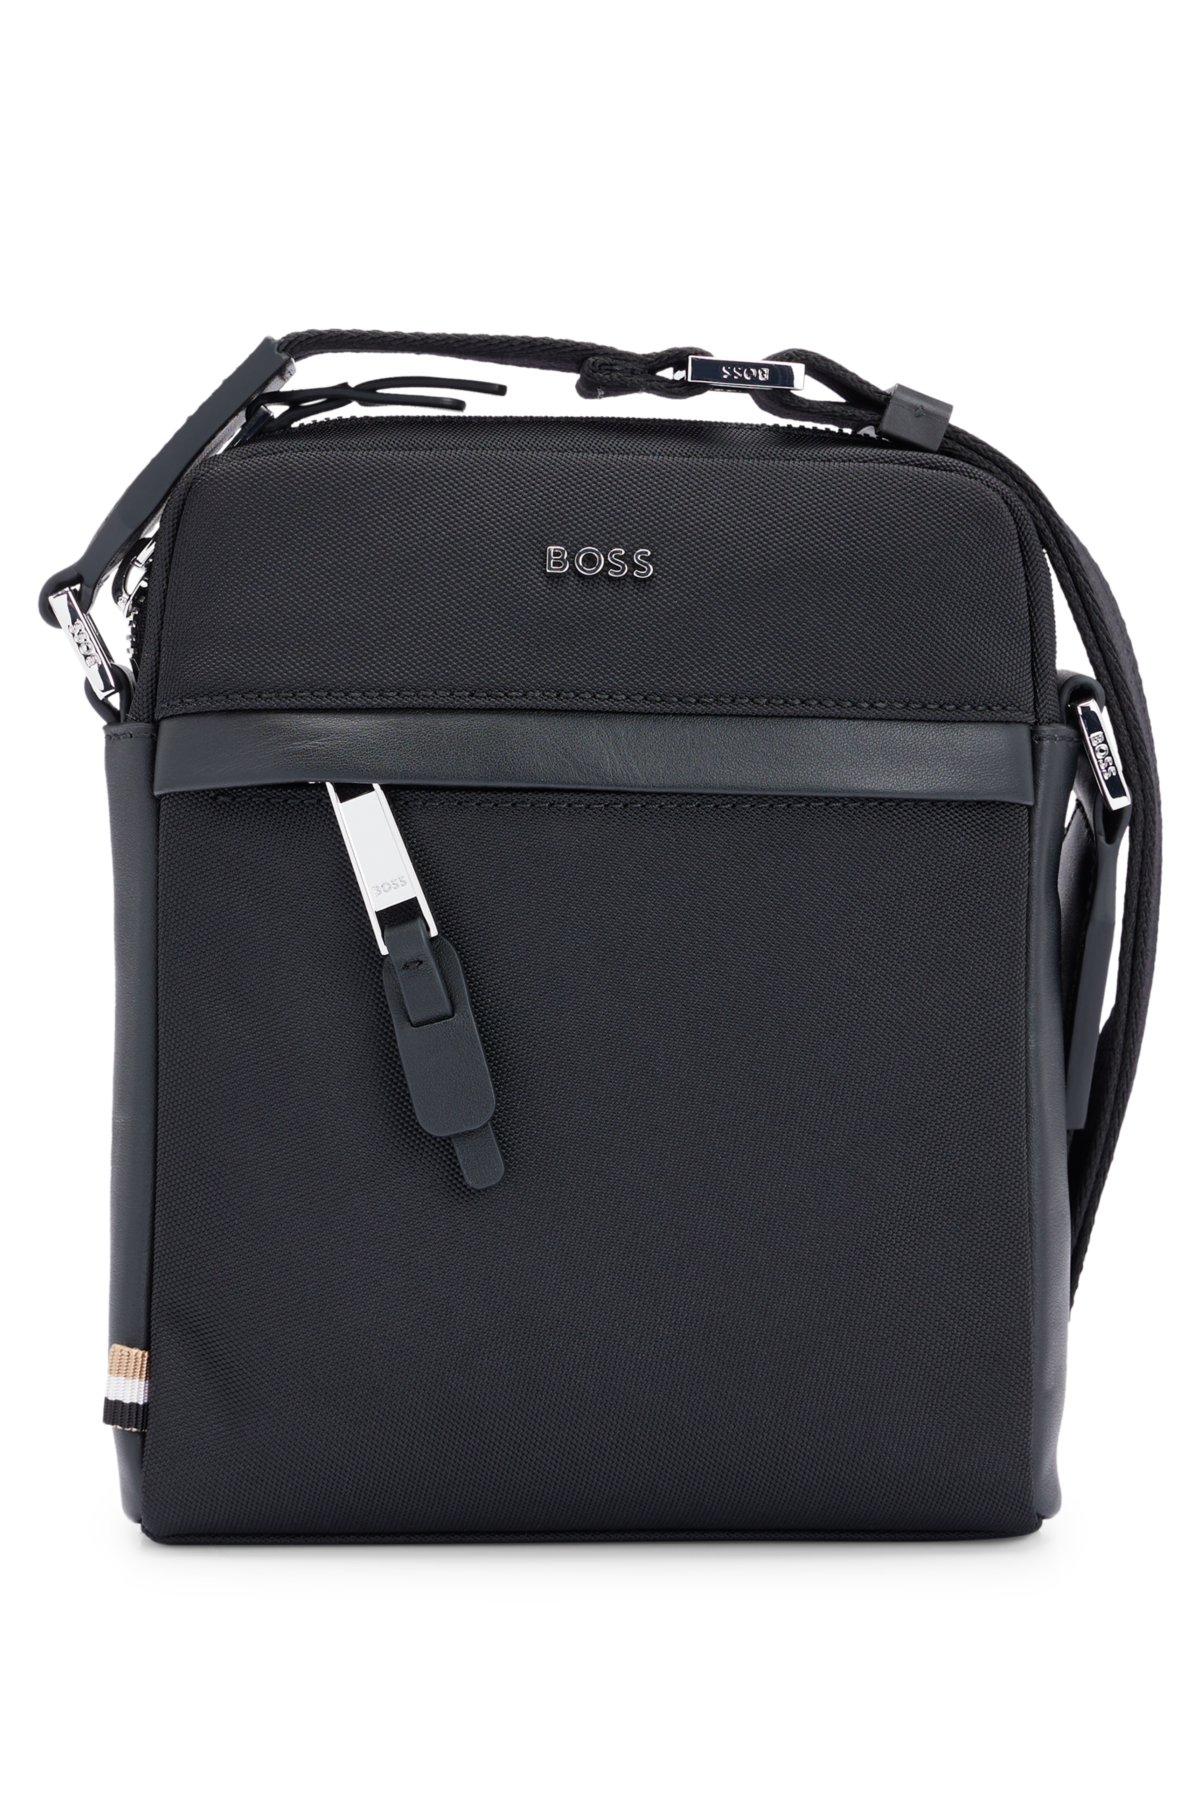 Structured-material logo bag with lettering - BOSS reporter